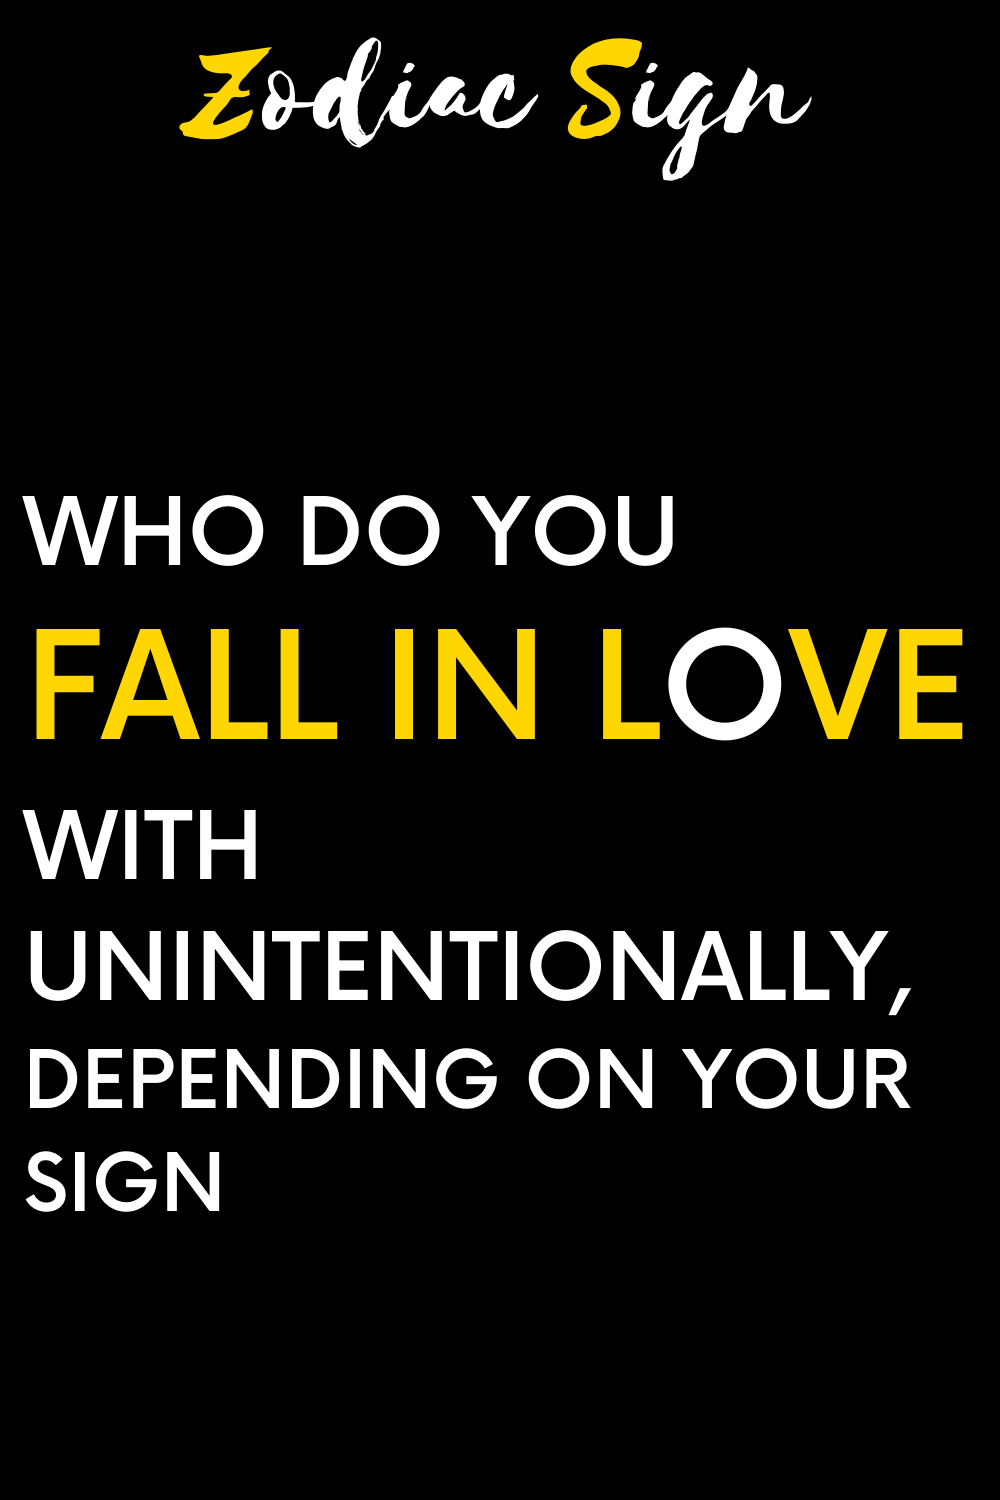 Who do you fall in love with unintentionally, depending on your sign